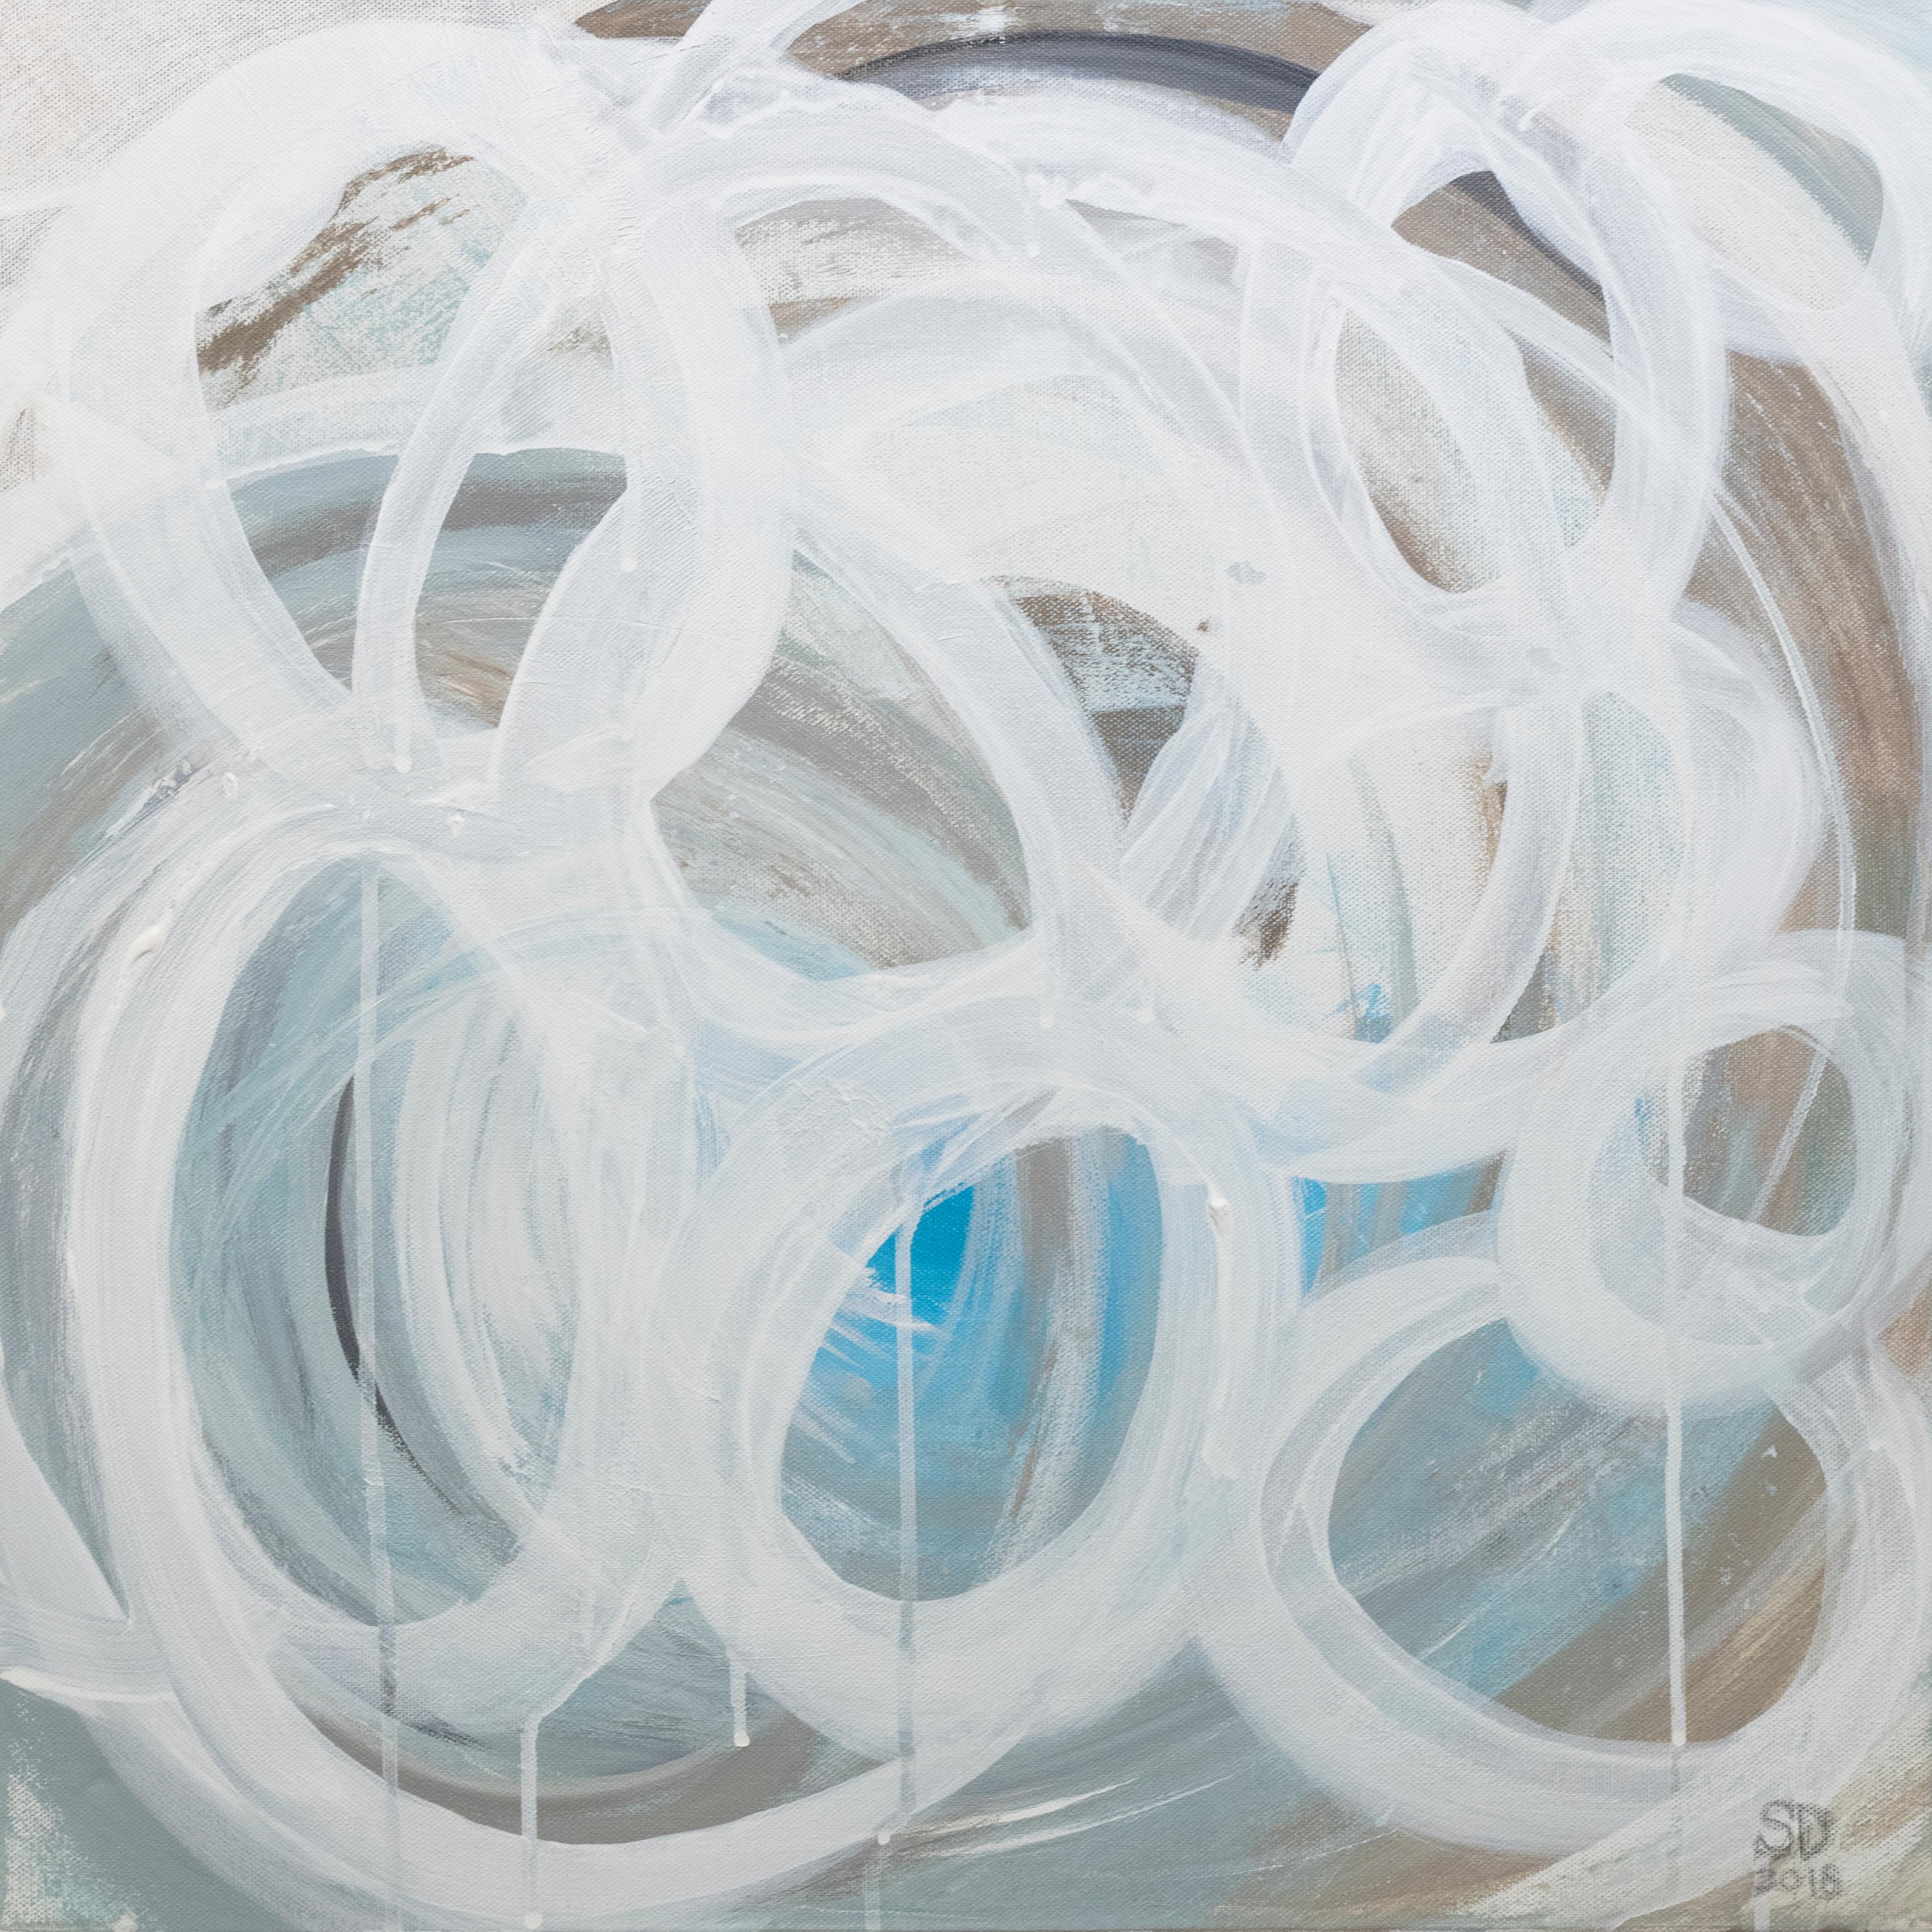 This abstract painting by Sue De Chiara is made with acrylic paint on canvas. It features a light blue-grey palette, with white circular shapes applied in light, loose strokes across the composition. The painting has clean, white painted sides, and